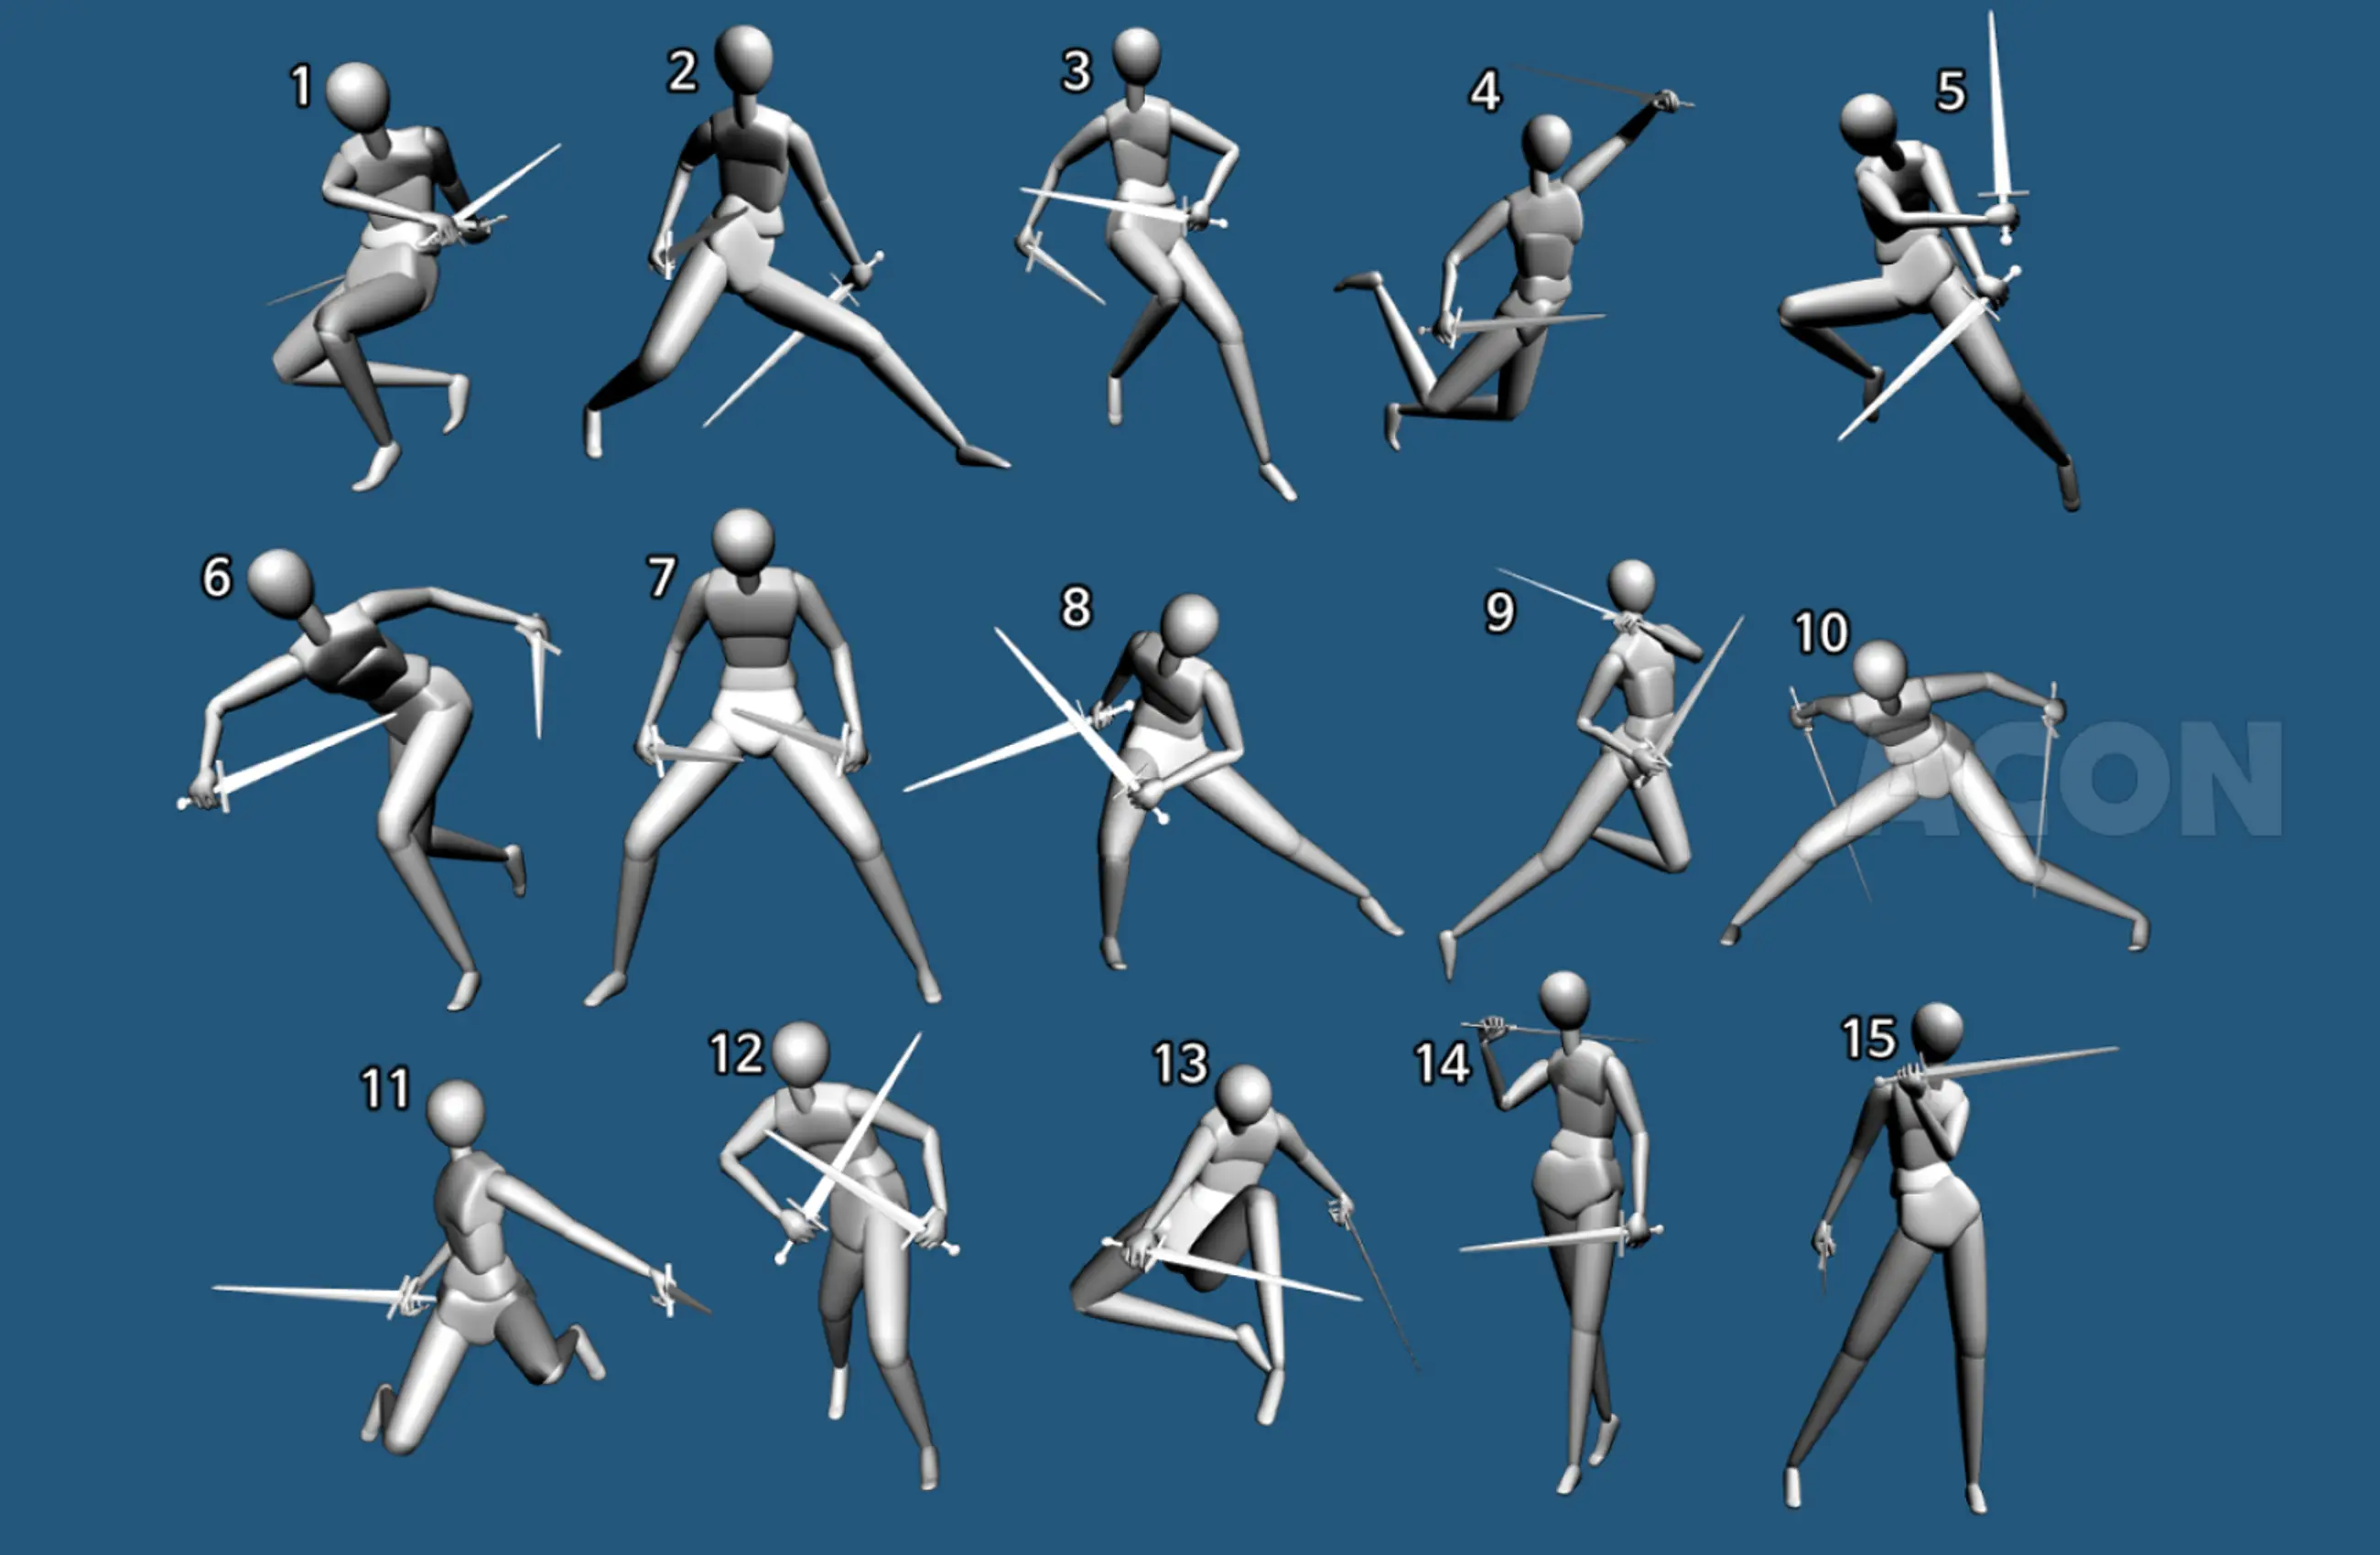 action poses reference sword